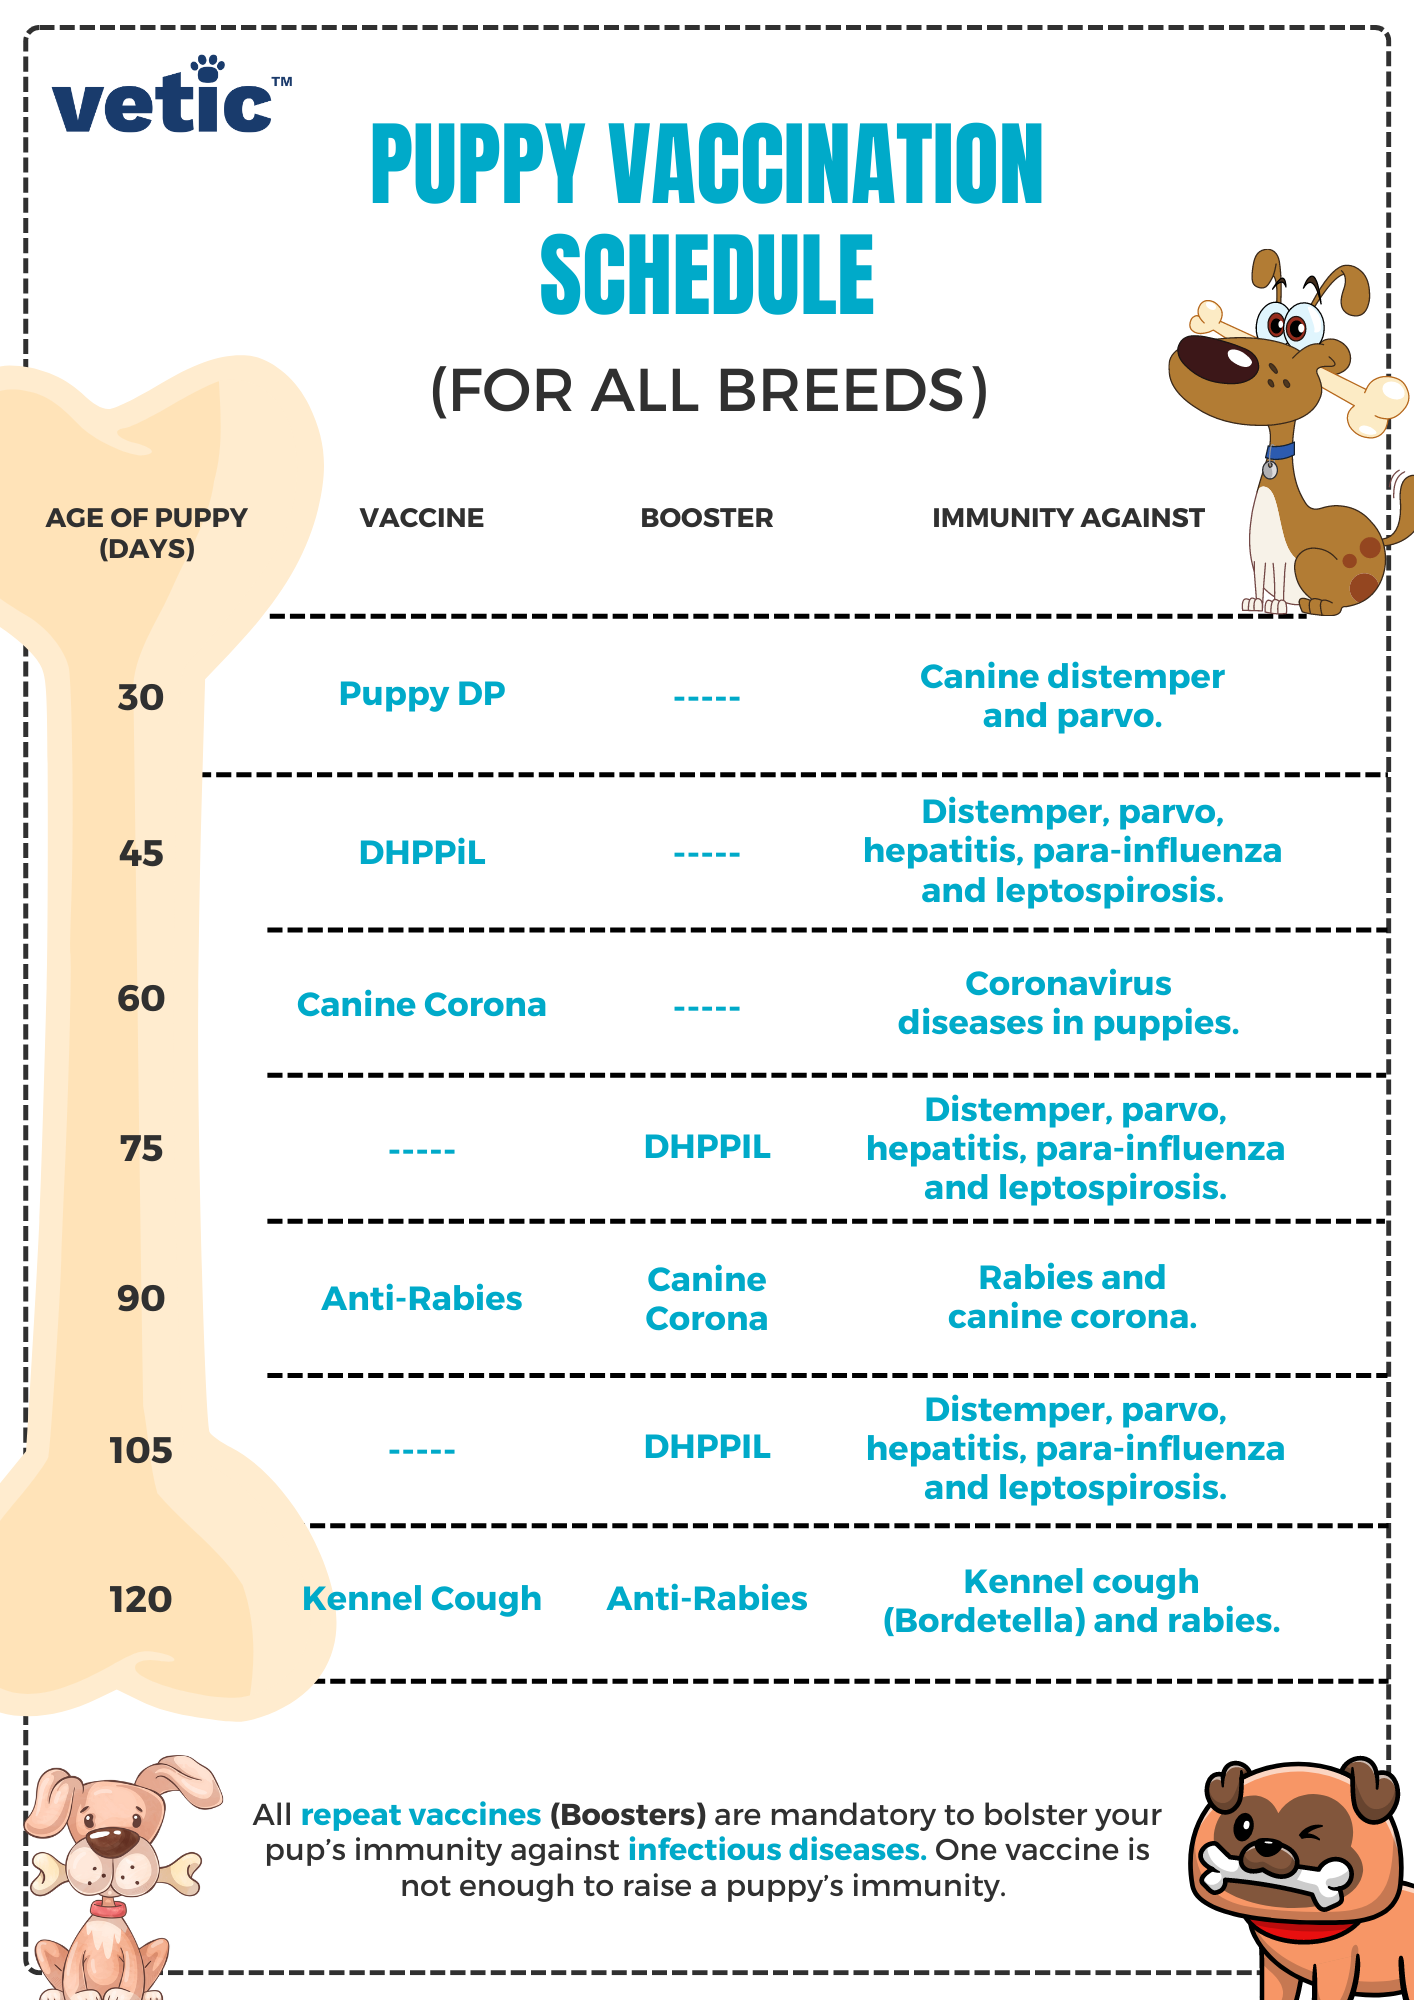 a list of mandatory puppy vaccines for puppies in India complete with timeline. vaccines necessary for pups in India -are Puppy DP, DHPPiL, Anti-rabies, Canine Corona and Kennel Cough. Get in touch with our veterinarian at Vetic Clinic Thane or Andheri for updating your dog's vaccinations. 